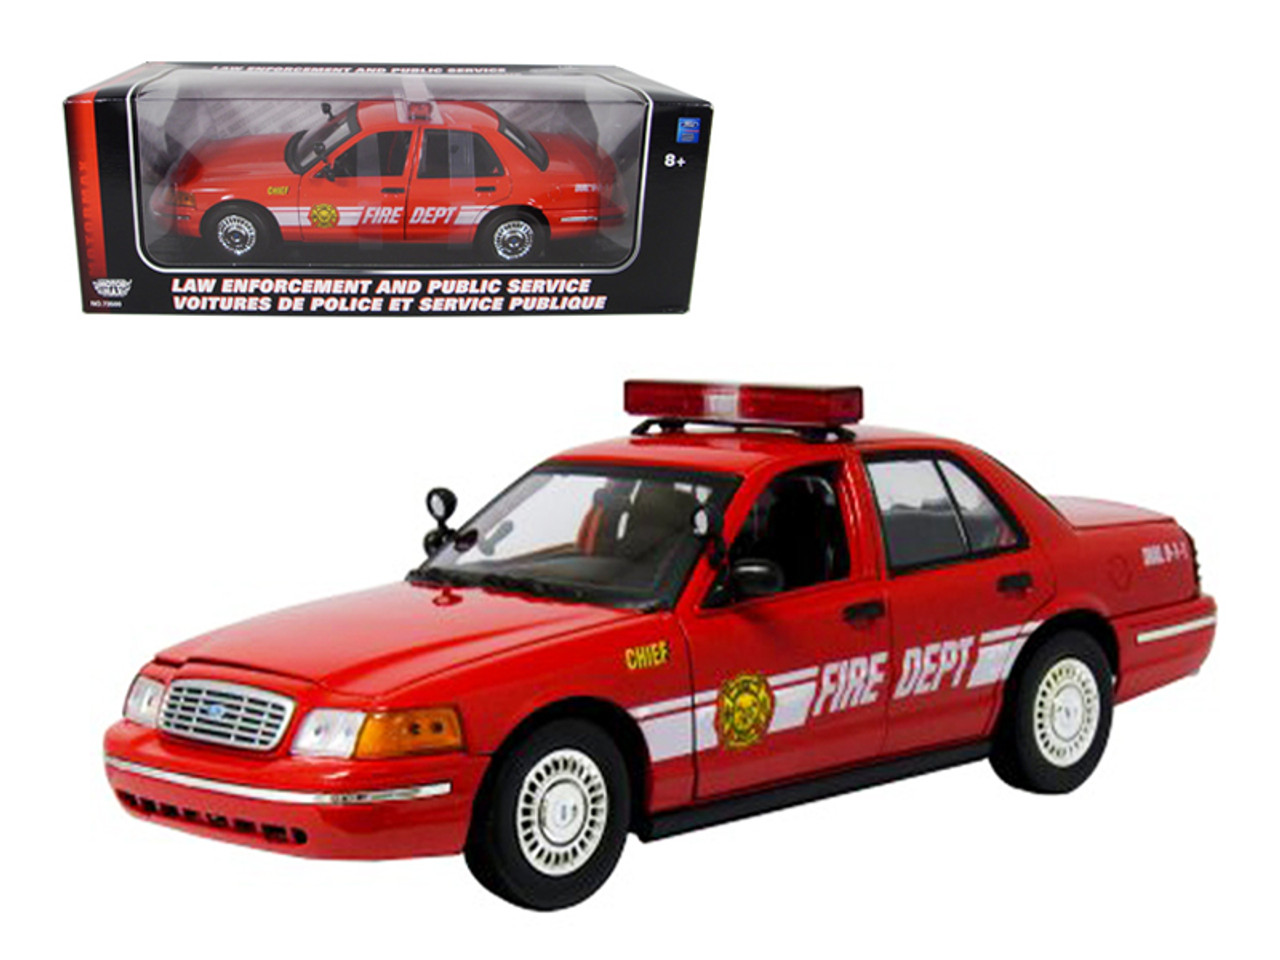 2001 Ford Crown Victoria Fire Chief Car 1/18 Diecast Model Car by Motormax